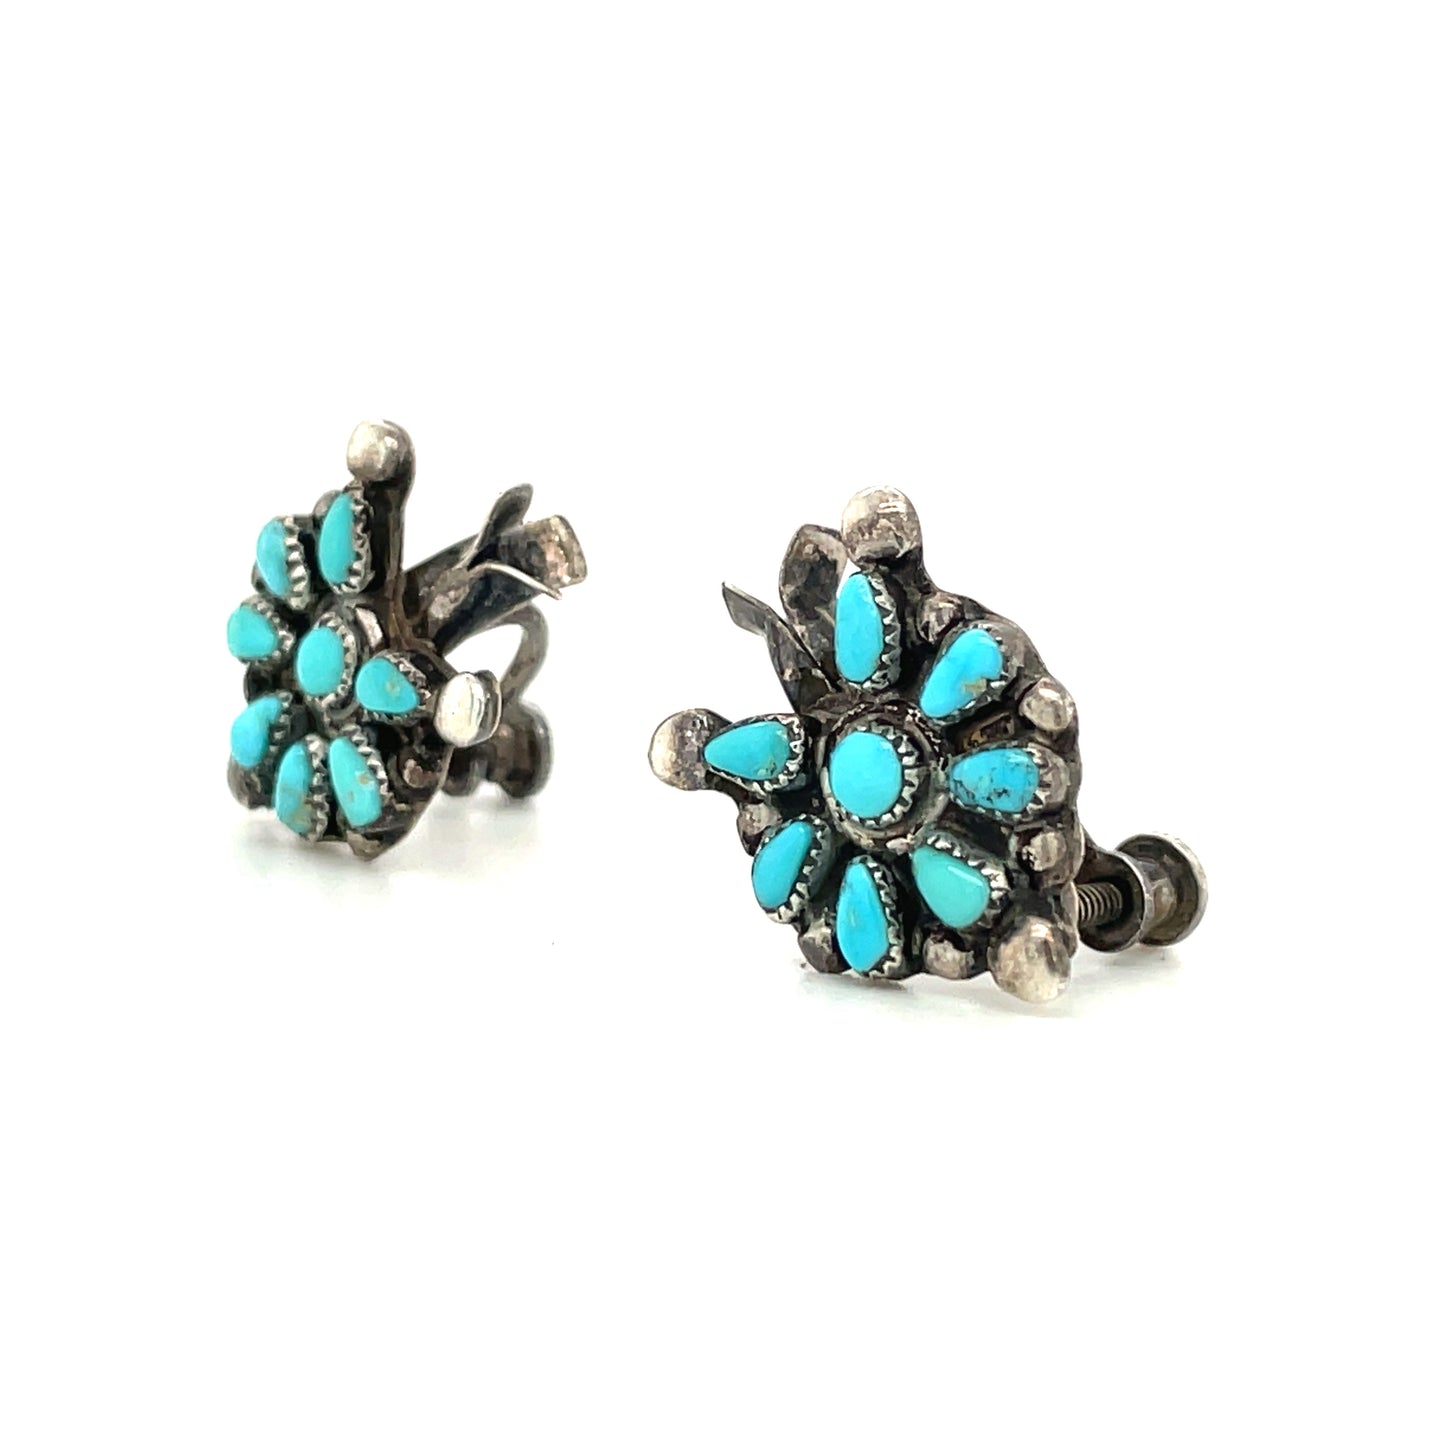 Vintage Southwestern Sterling Silver and Turquoise Screw Back Earrings